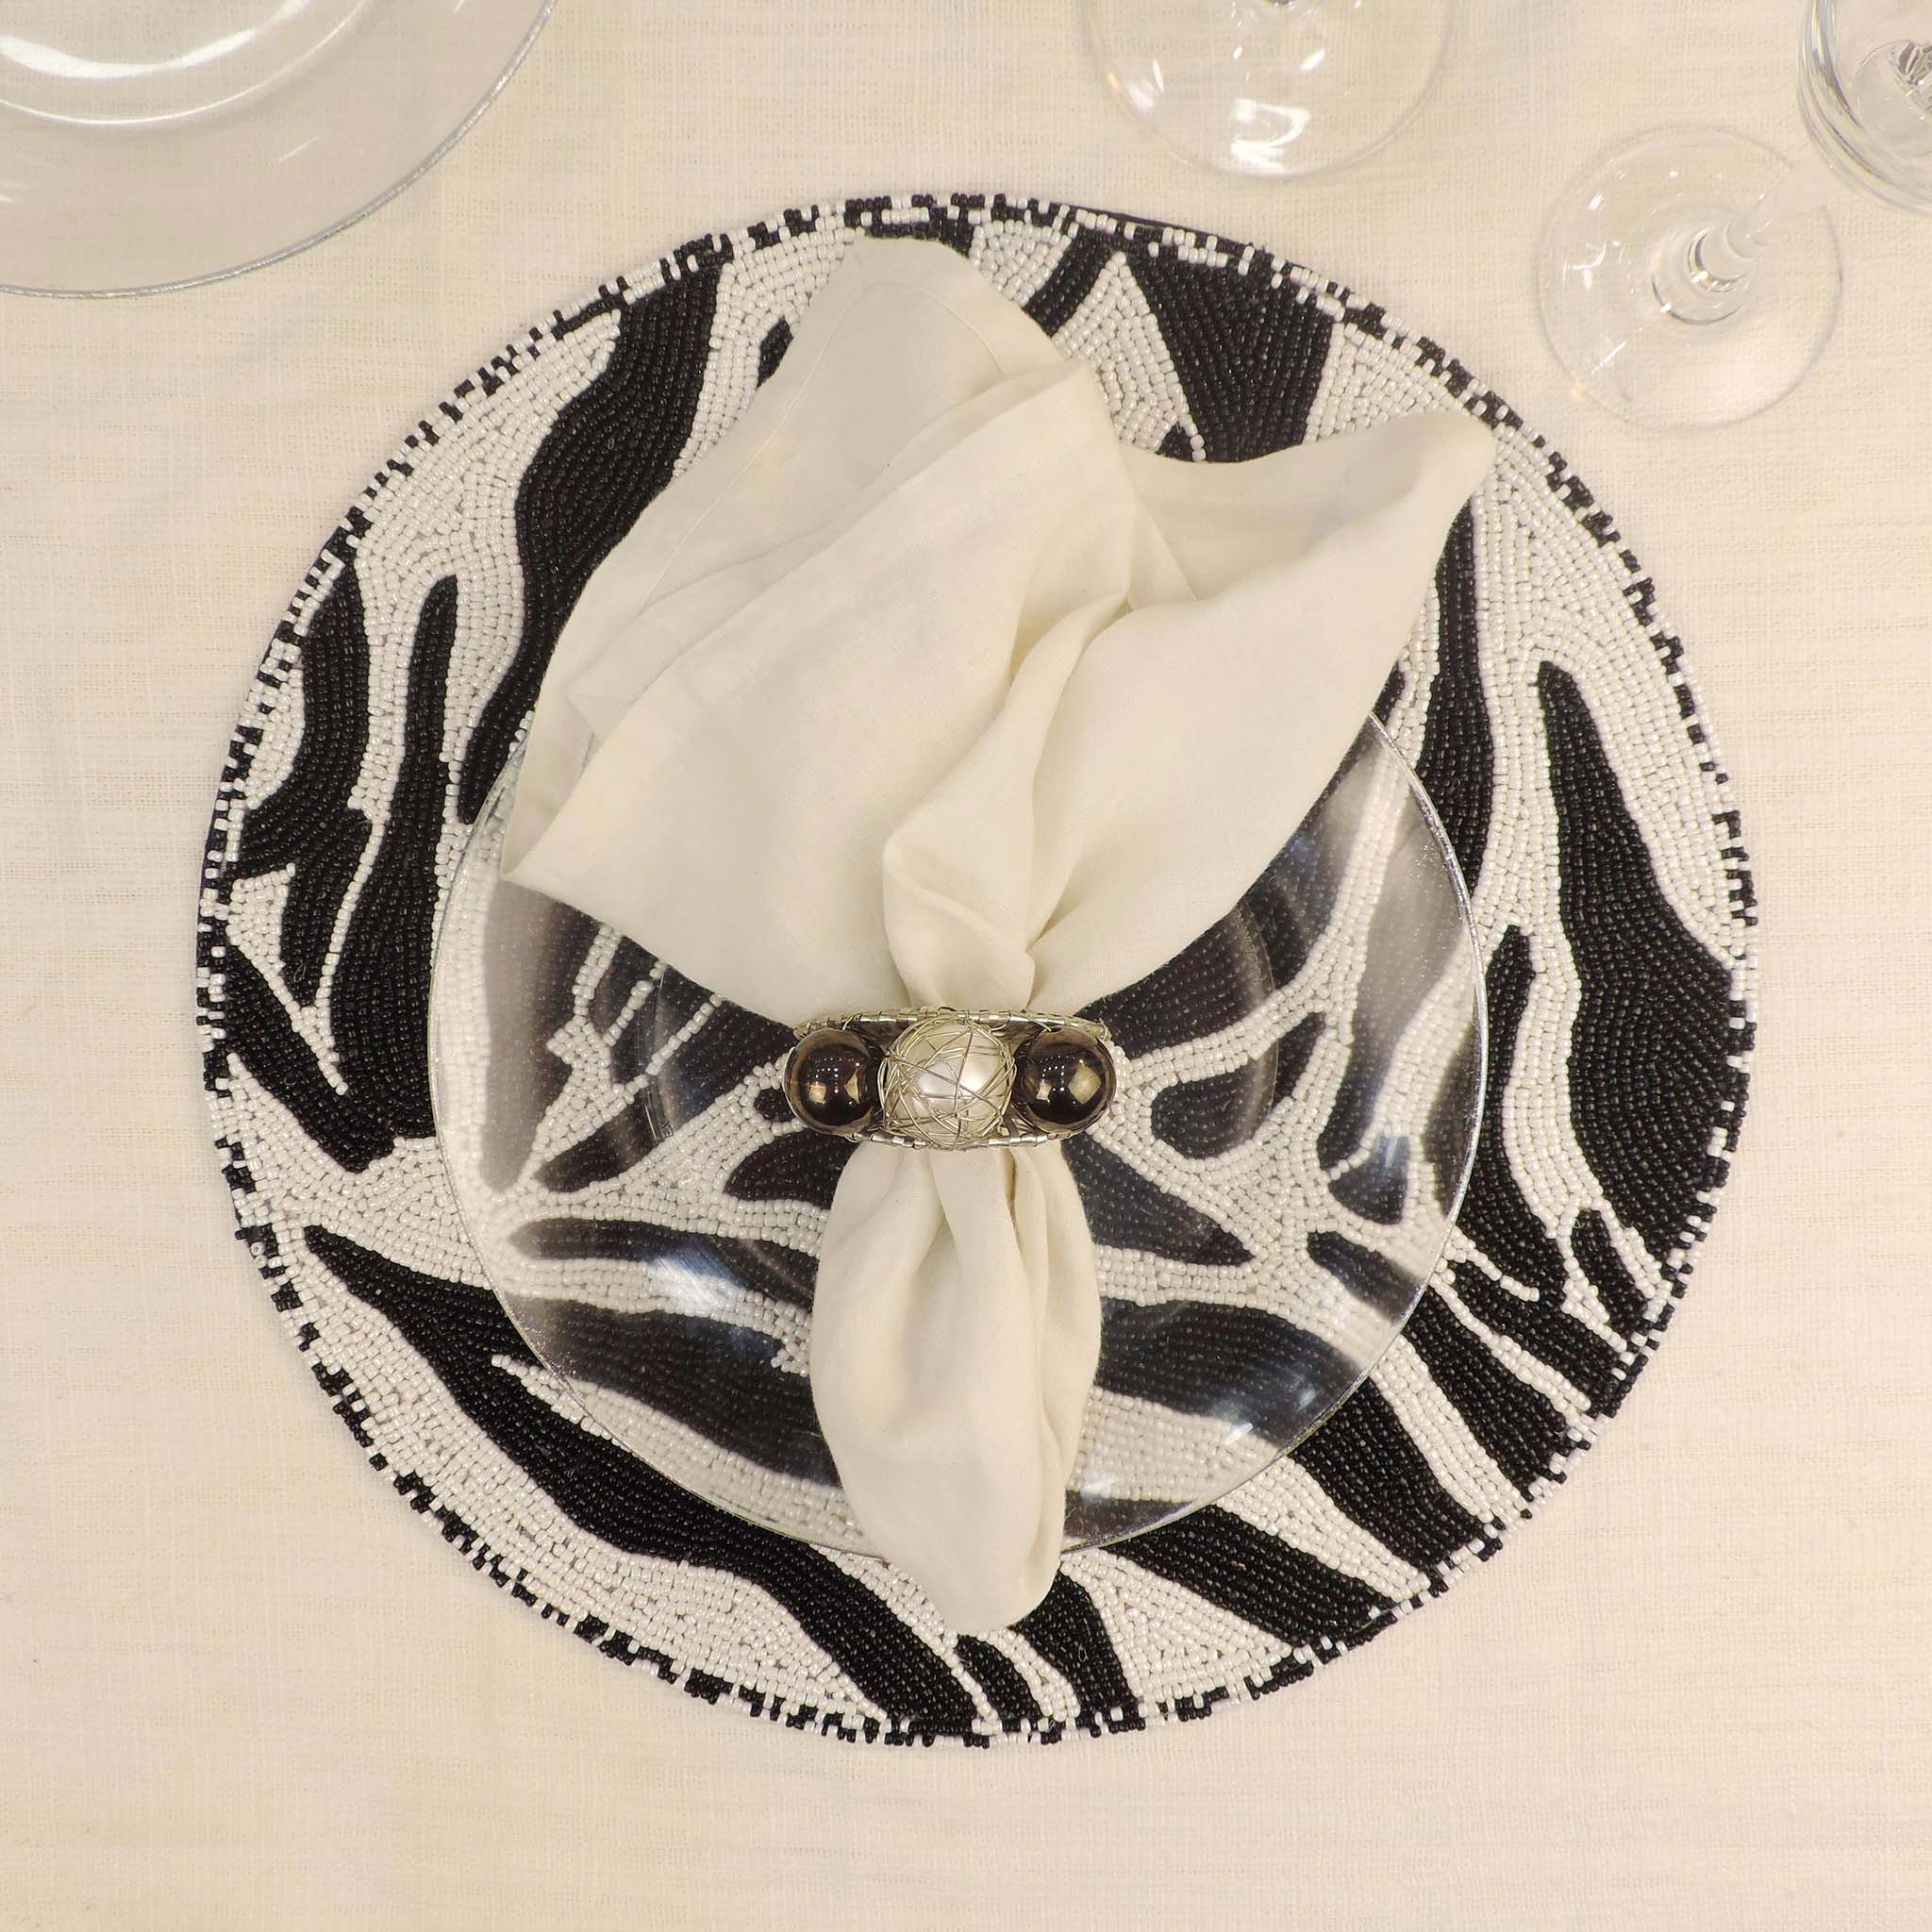 Modern Camo Glass Bead Embroidered Placemat in Black & White, Set of 2/4